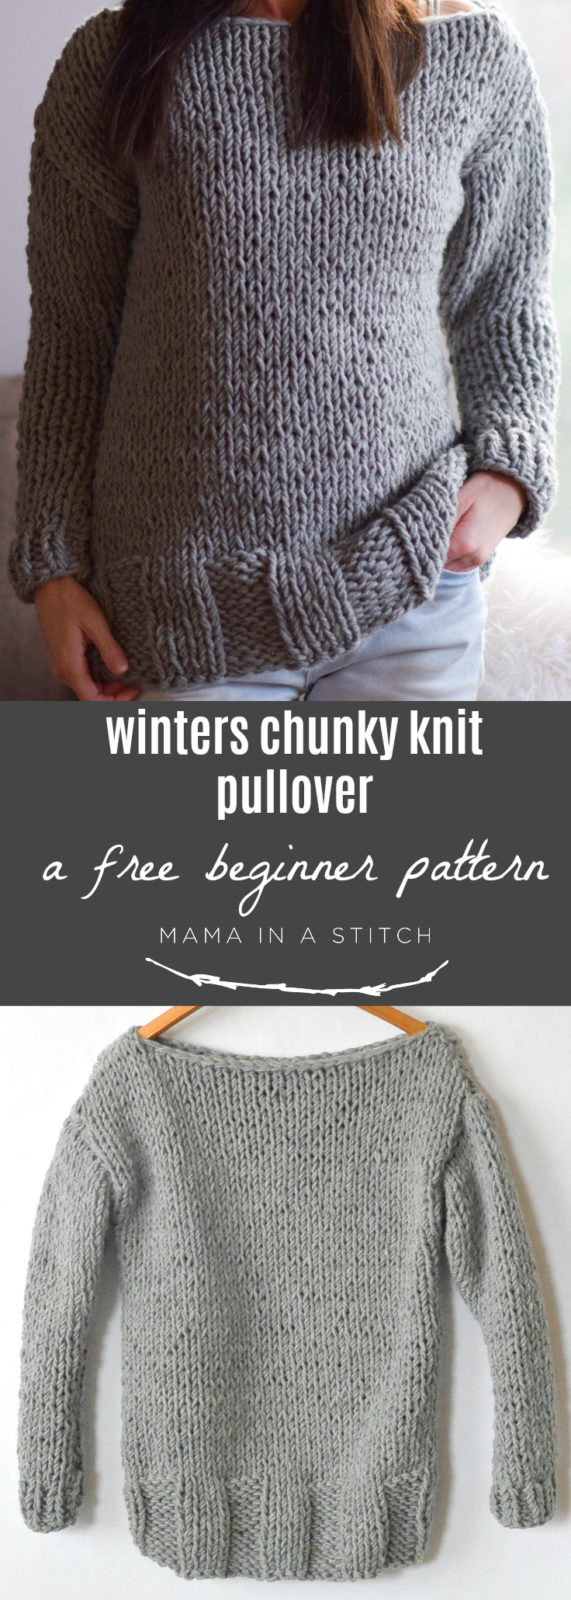 Free Cardigan Knitting Patterns For Beginners Free Knitting Patterns With Chunky Wool